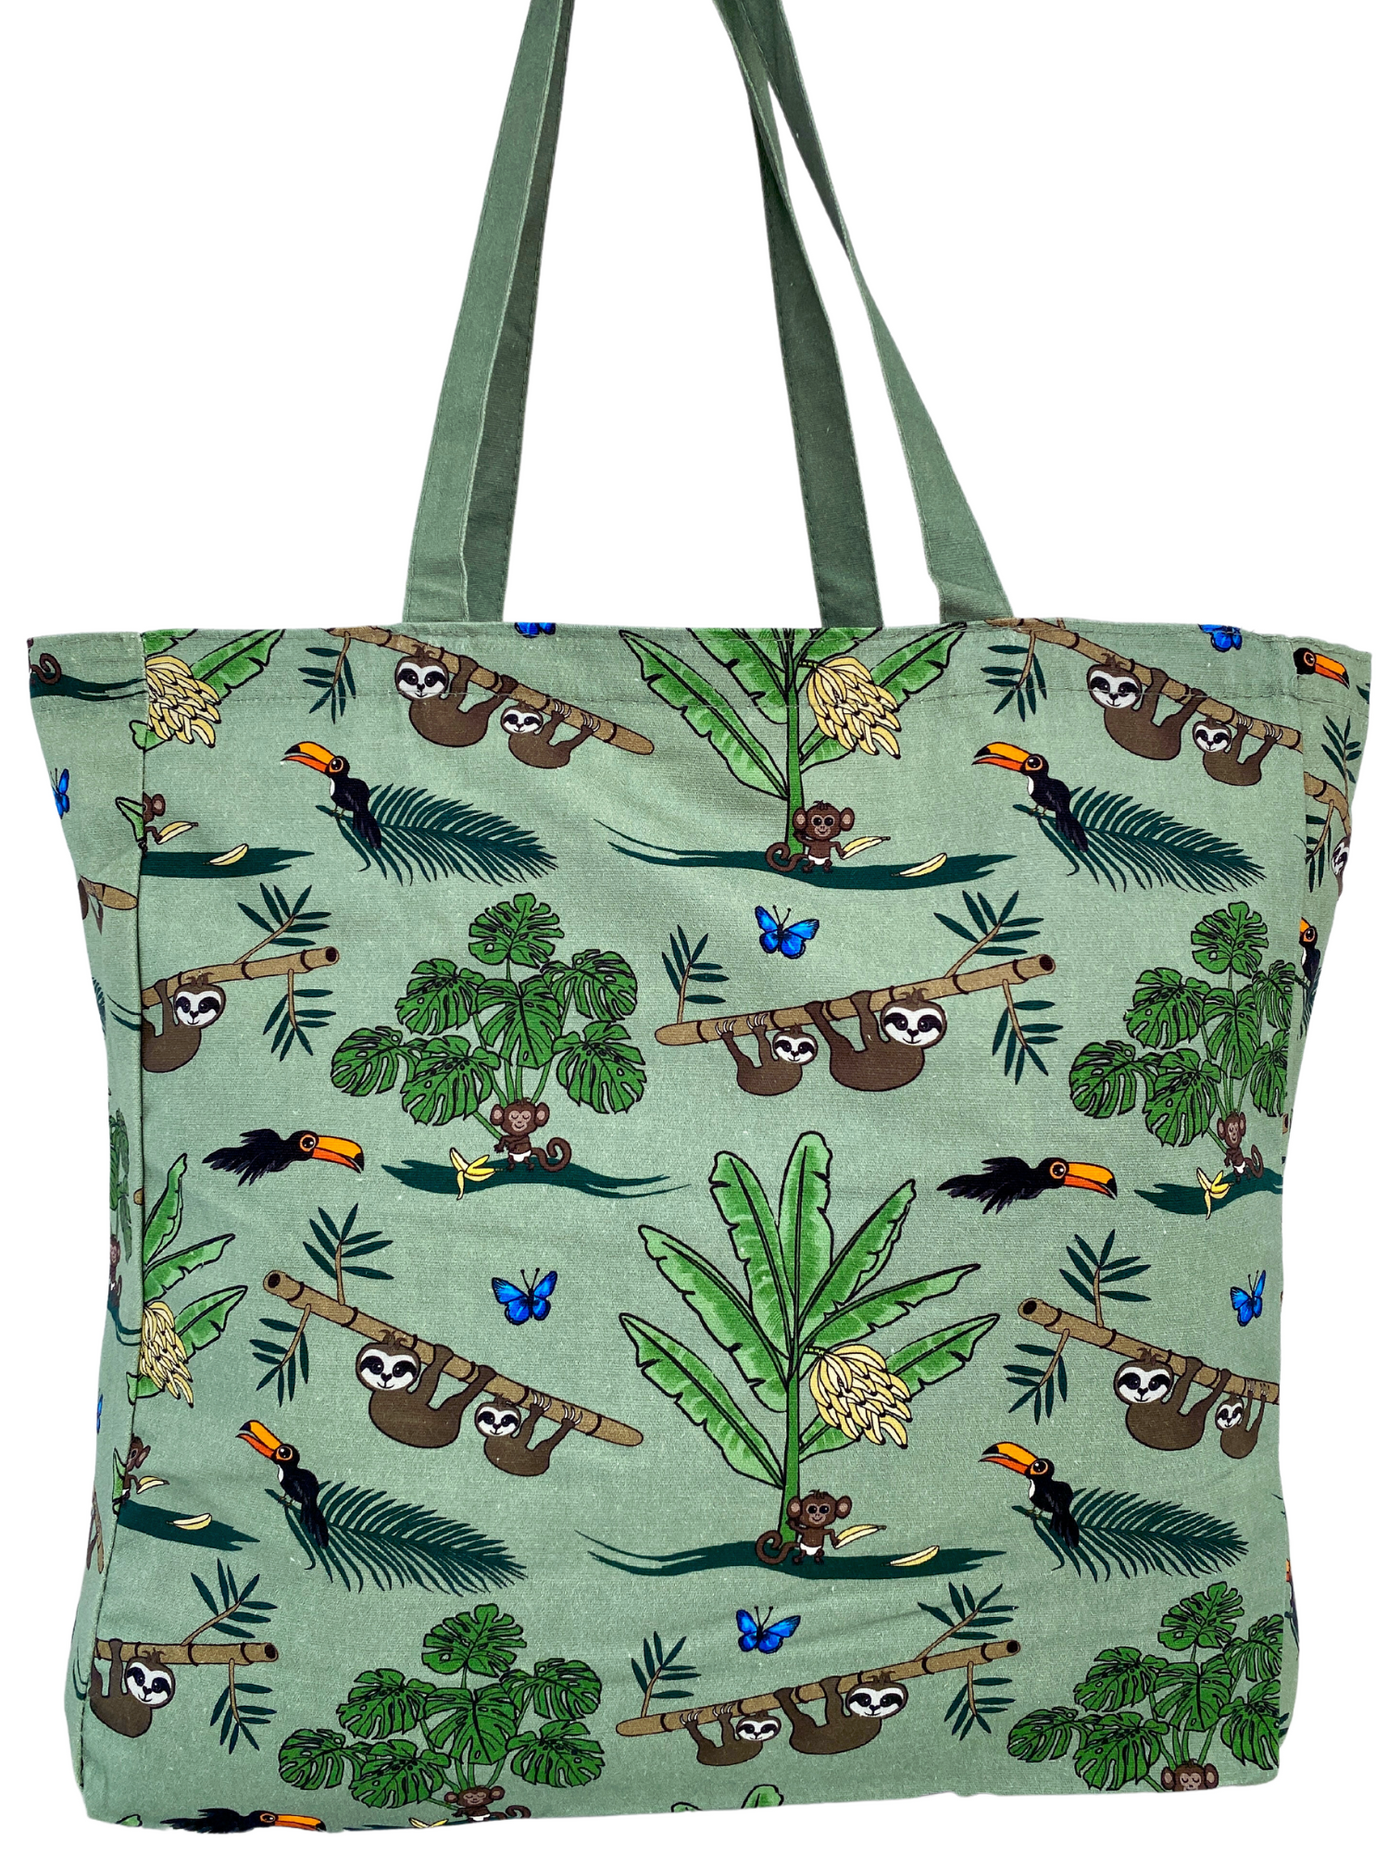 Illustrated Tote Bag: Sloths in the jungle